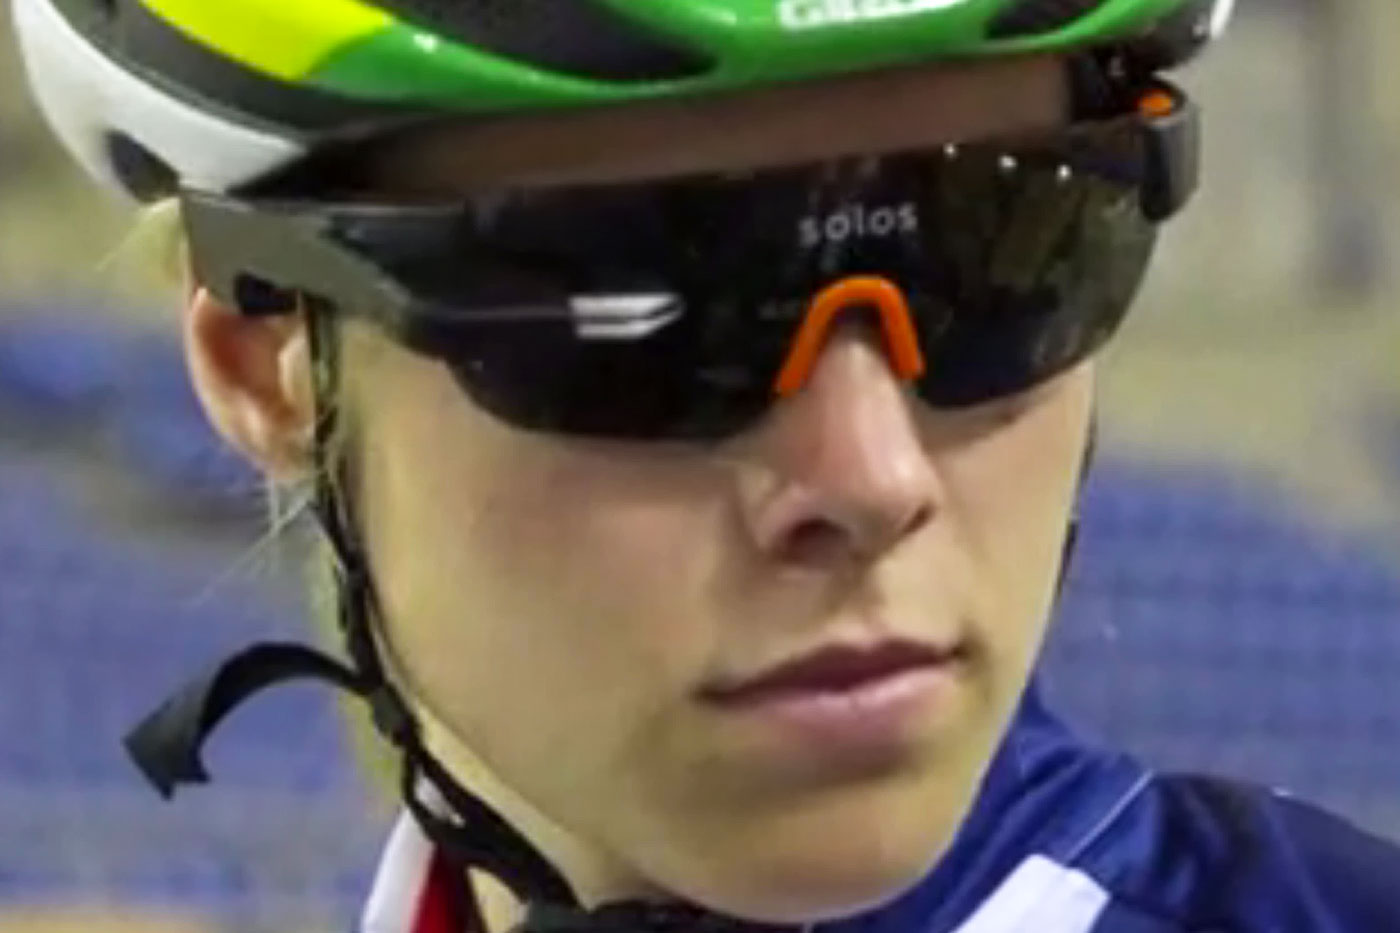 The US Olympic cycling team is training with smart glasses